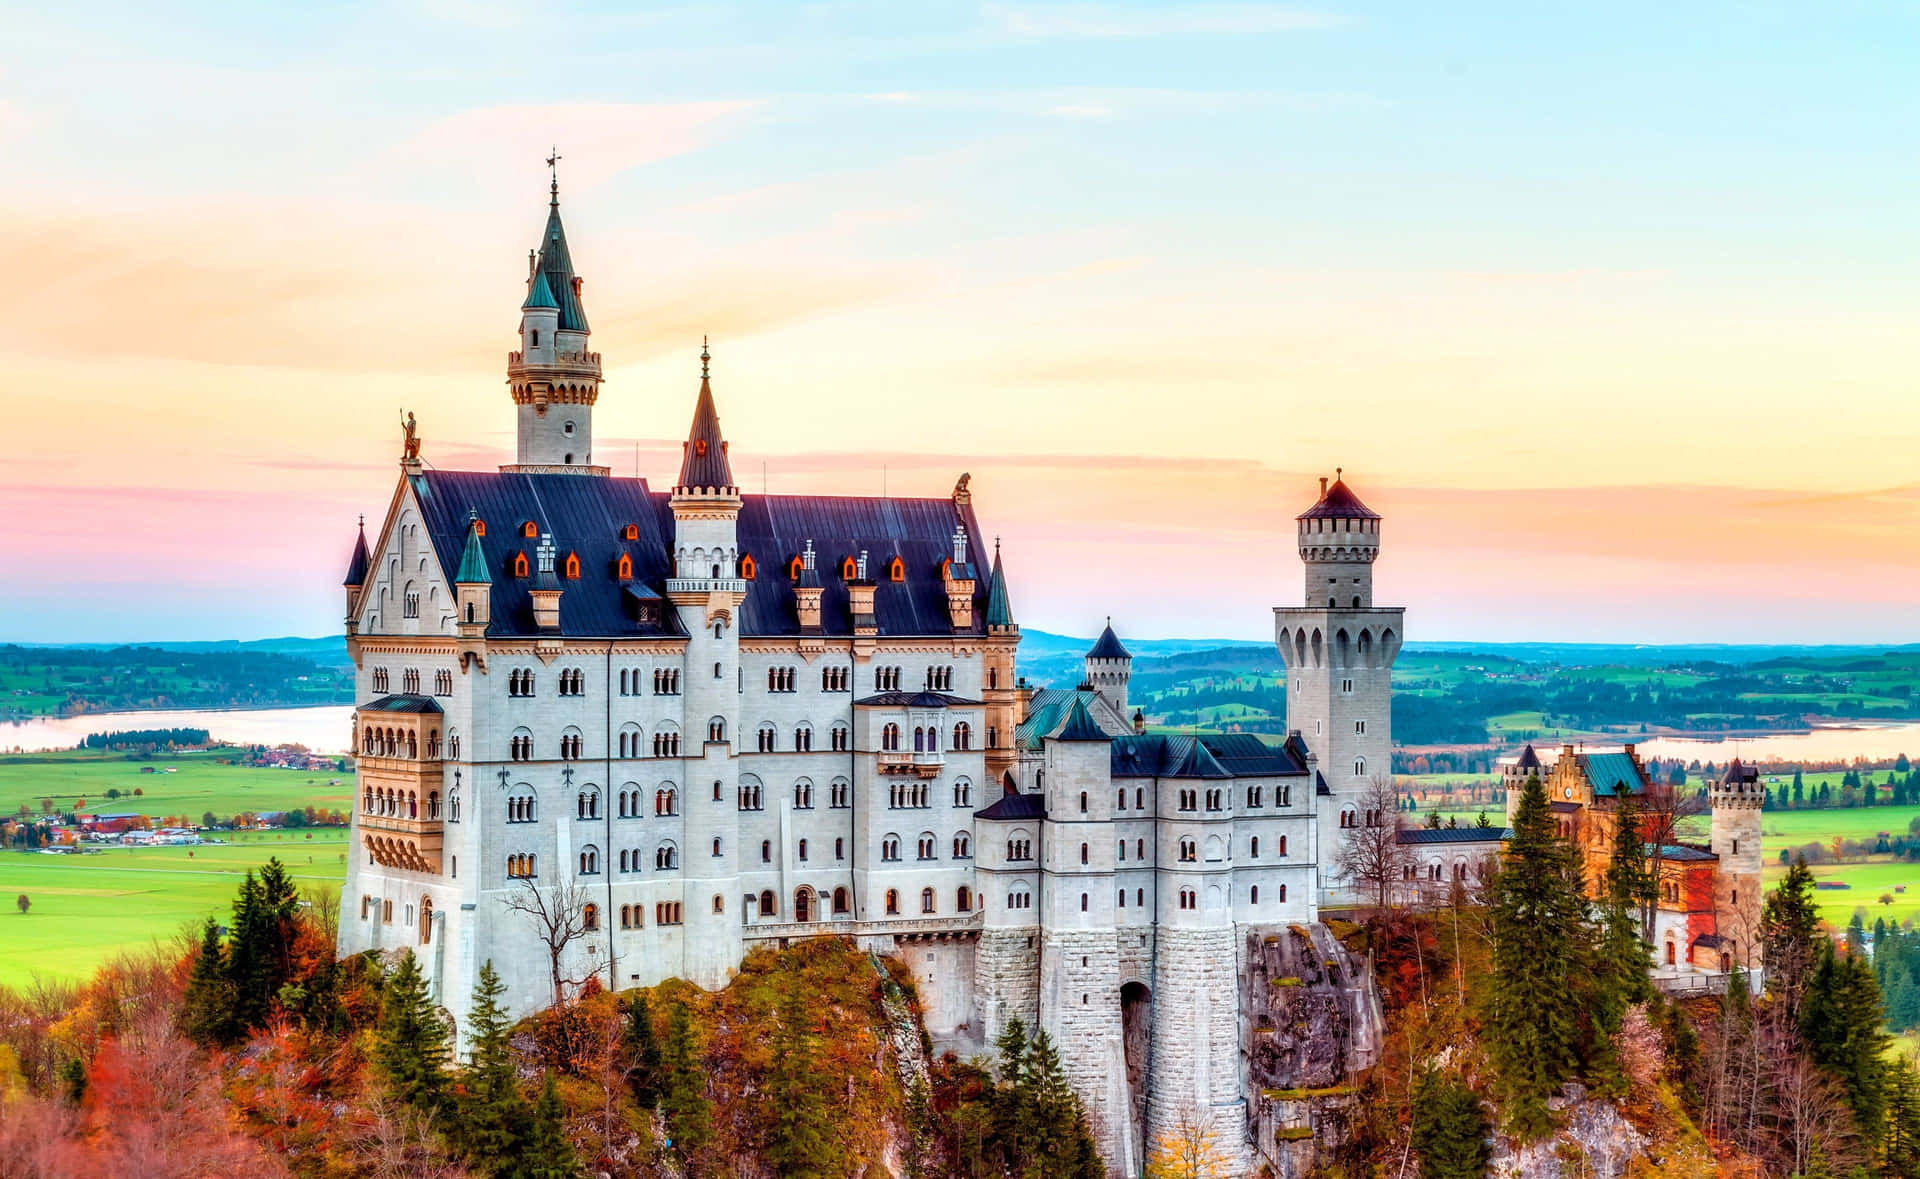 Discover the beauty of Germany